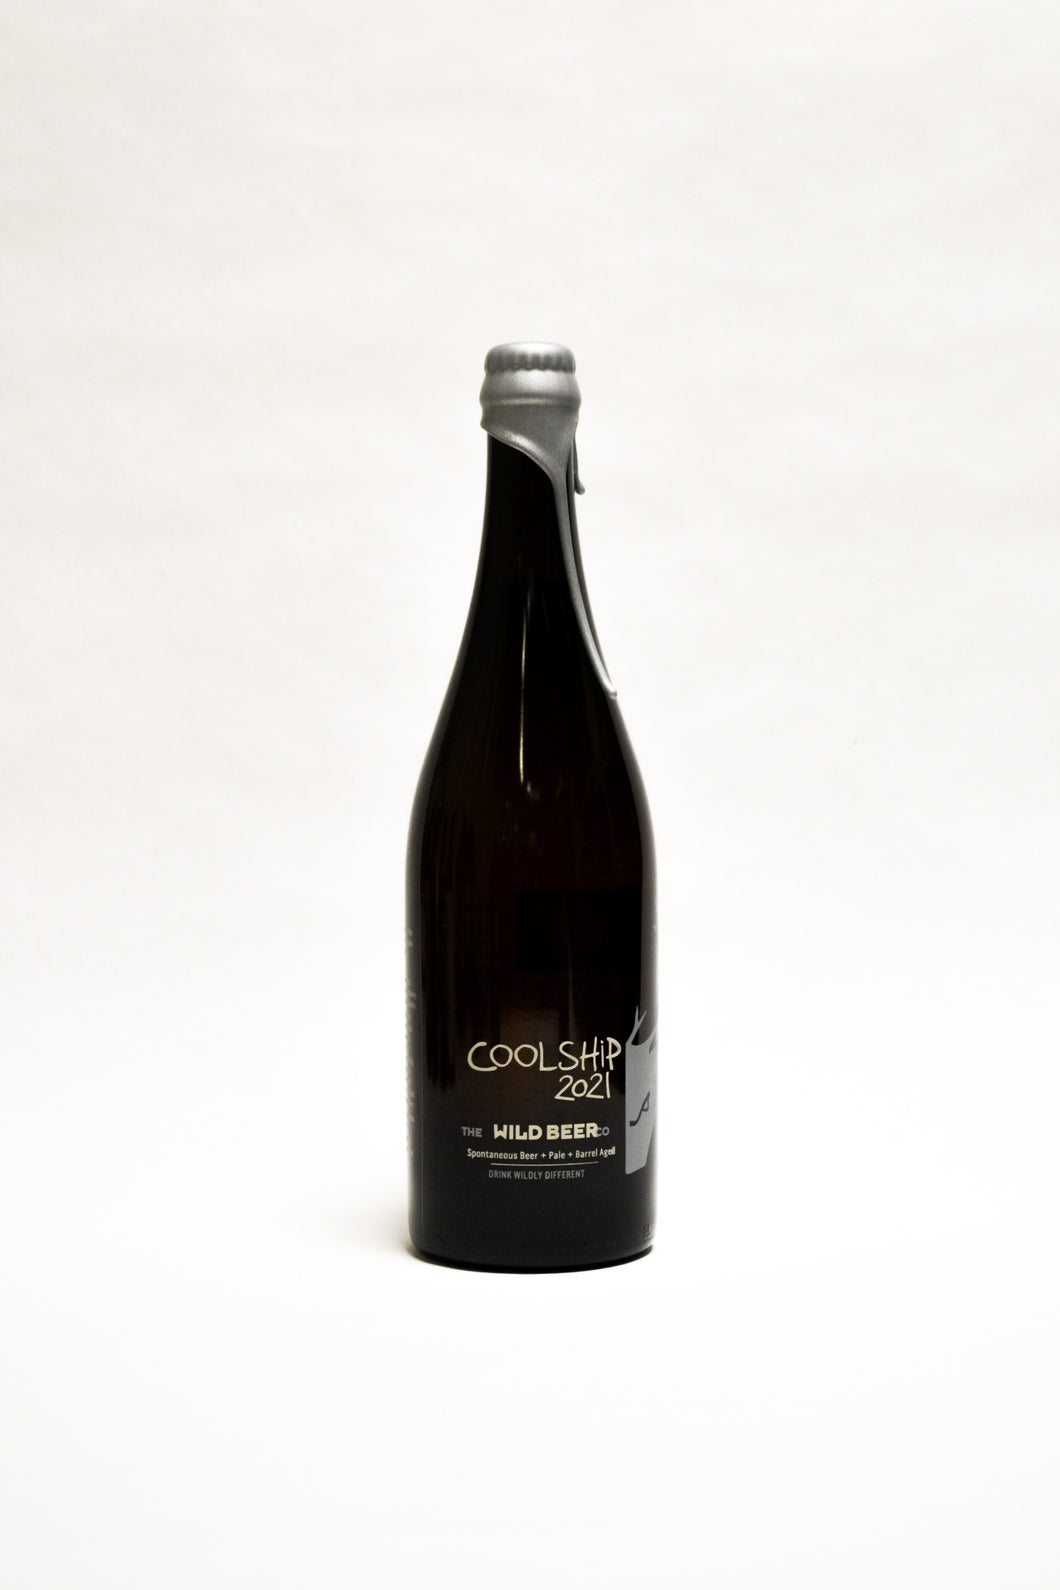 The Wild Beer Co. - Coolship 2021